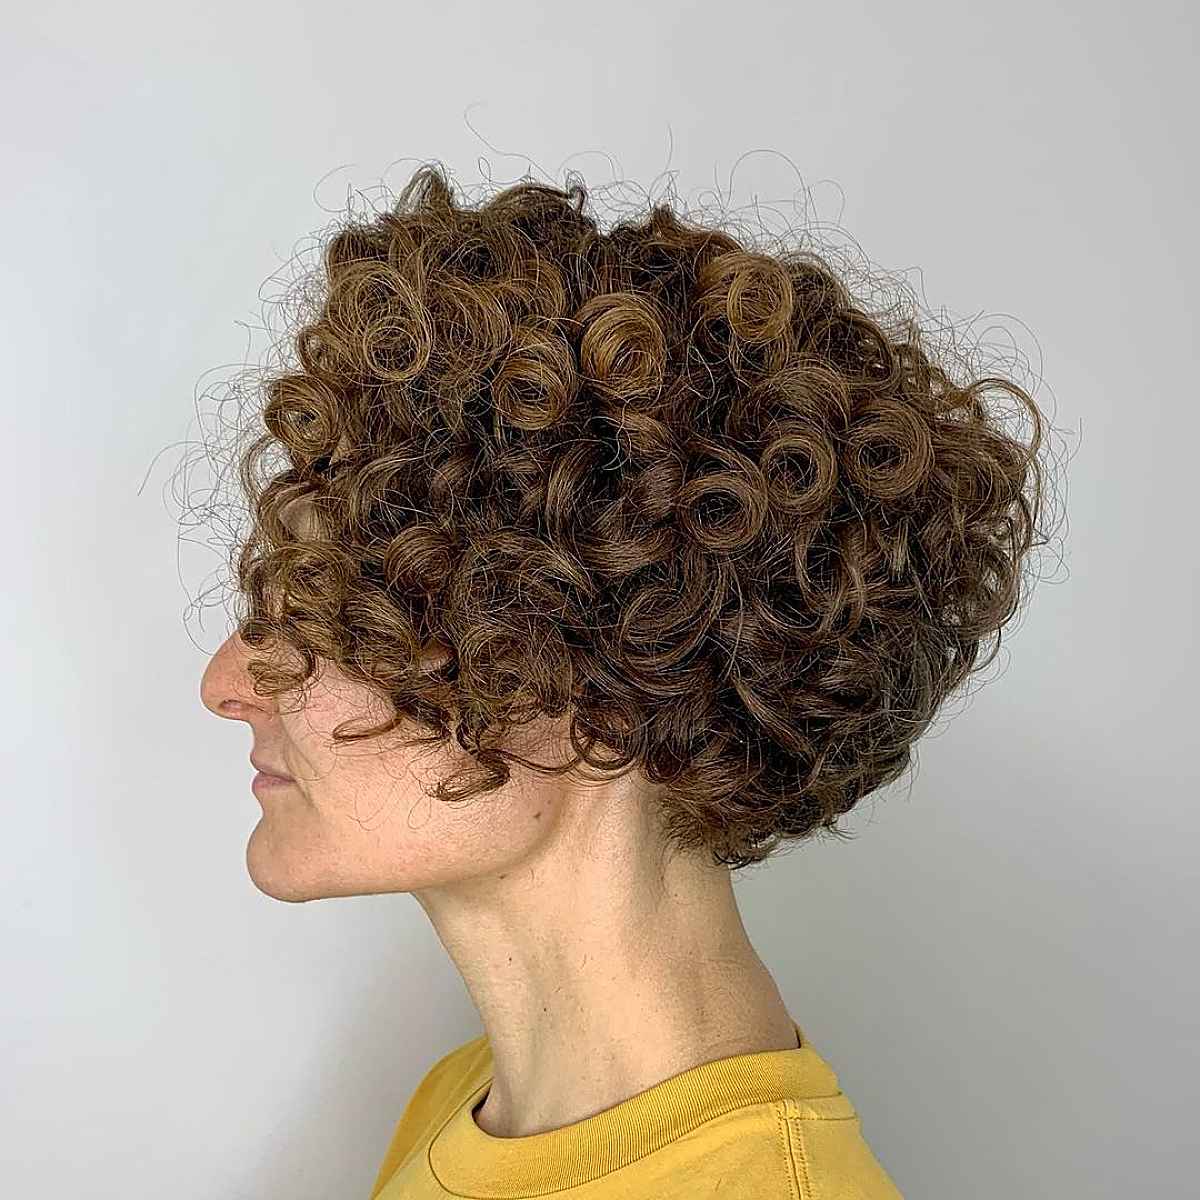 15 Stacked, Short Curly Bob Haircuts to Enhance Your Natural Curls